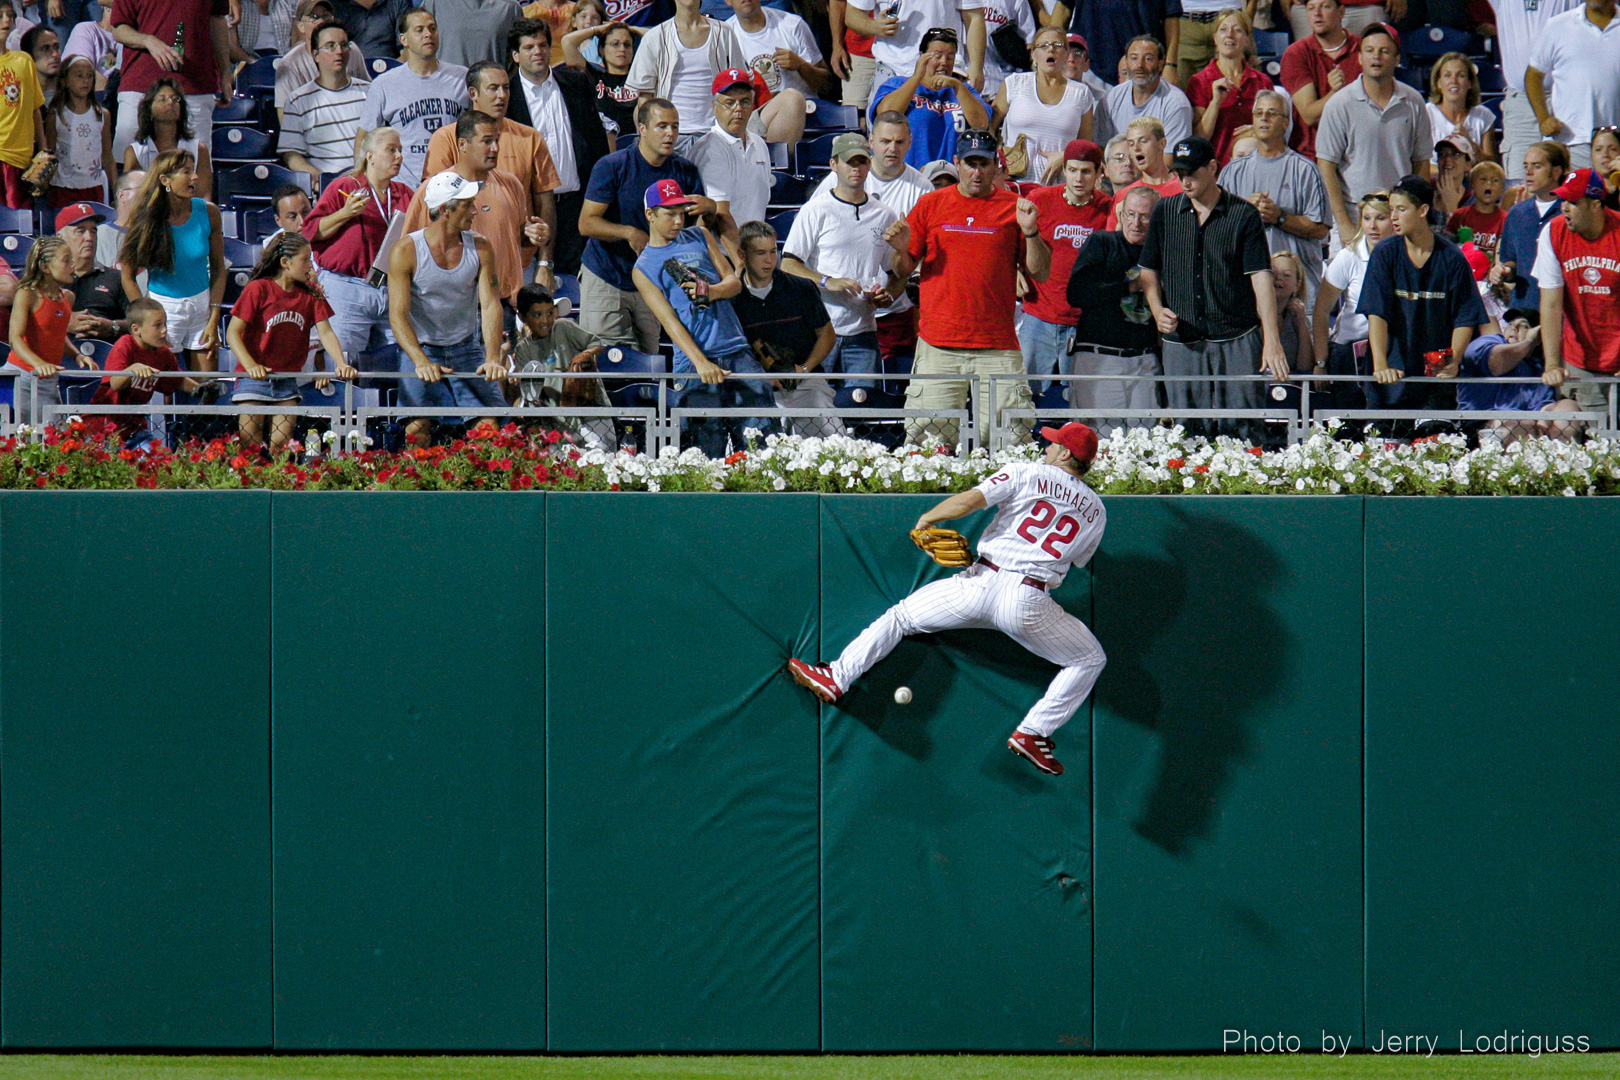 Phillies left fielder Jason Michaels goes high up on the wall but can't catch a ball hit by the Rockies Rodd Helton for a double in the 9th inning. The Philadelphia Phillies lost 5-4 to the Colorado Rockies in Philadelphia on Tuesday August 10, 2004.